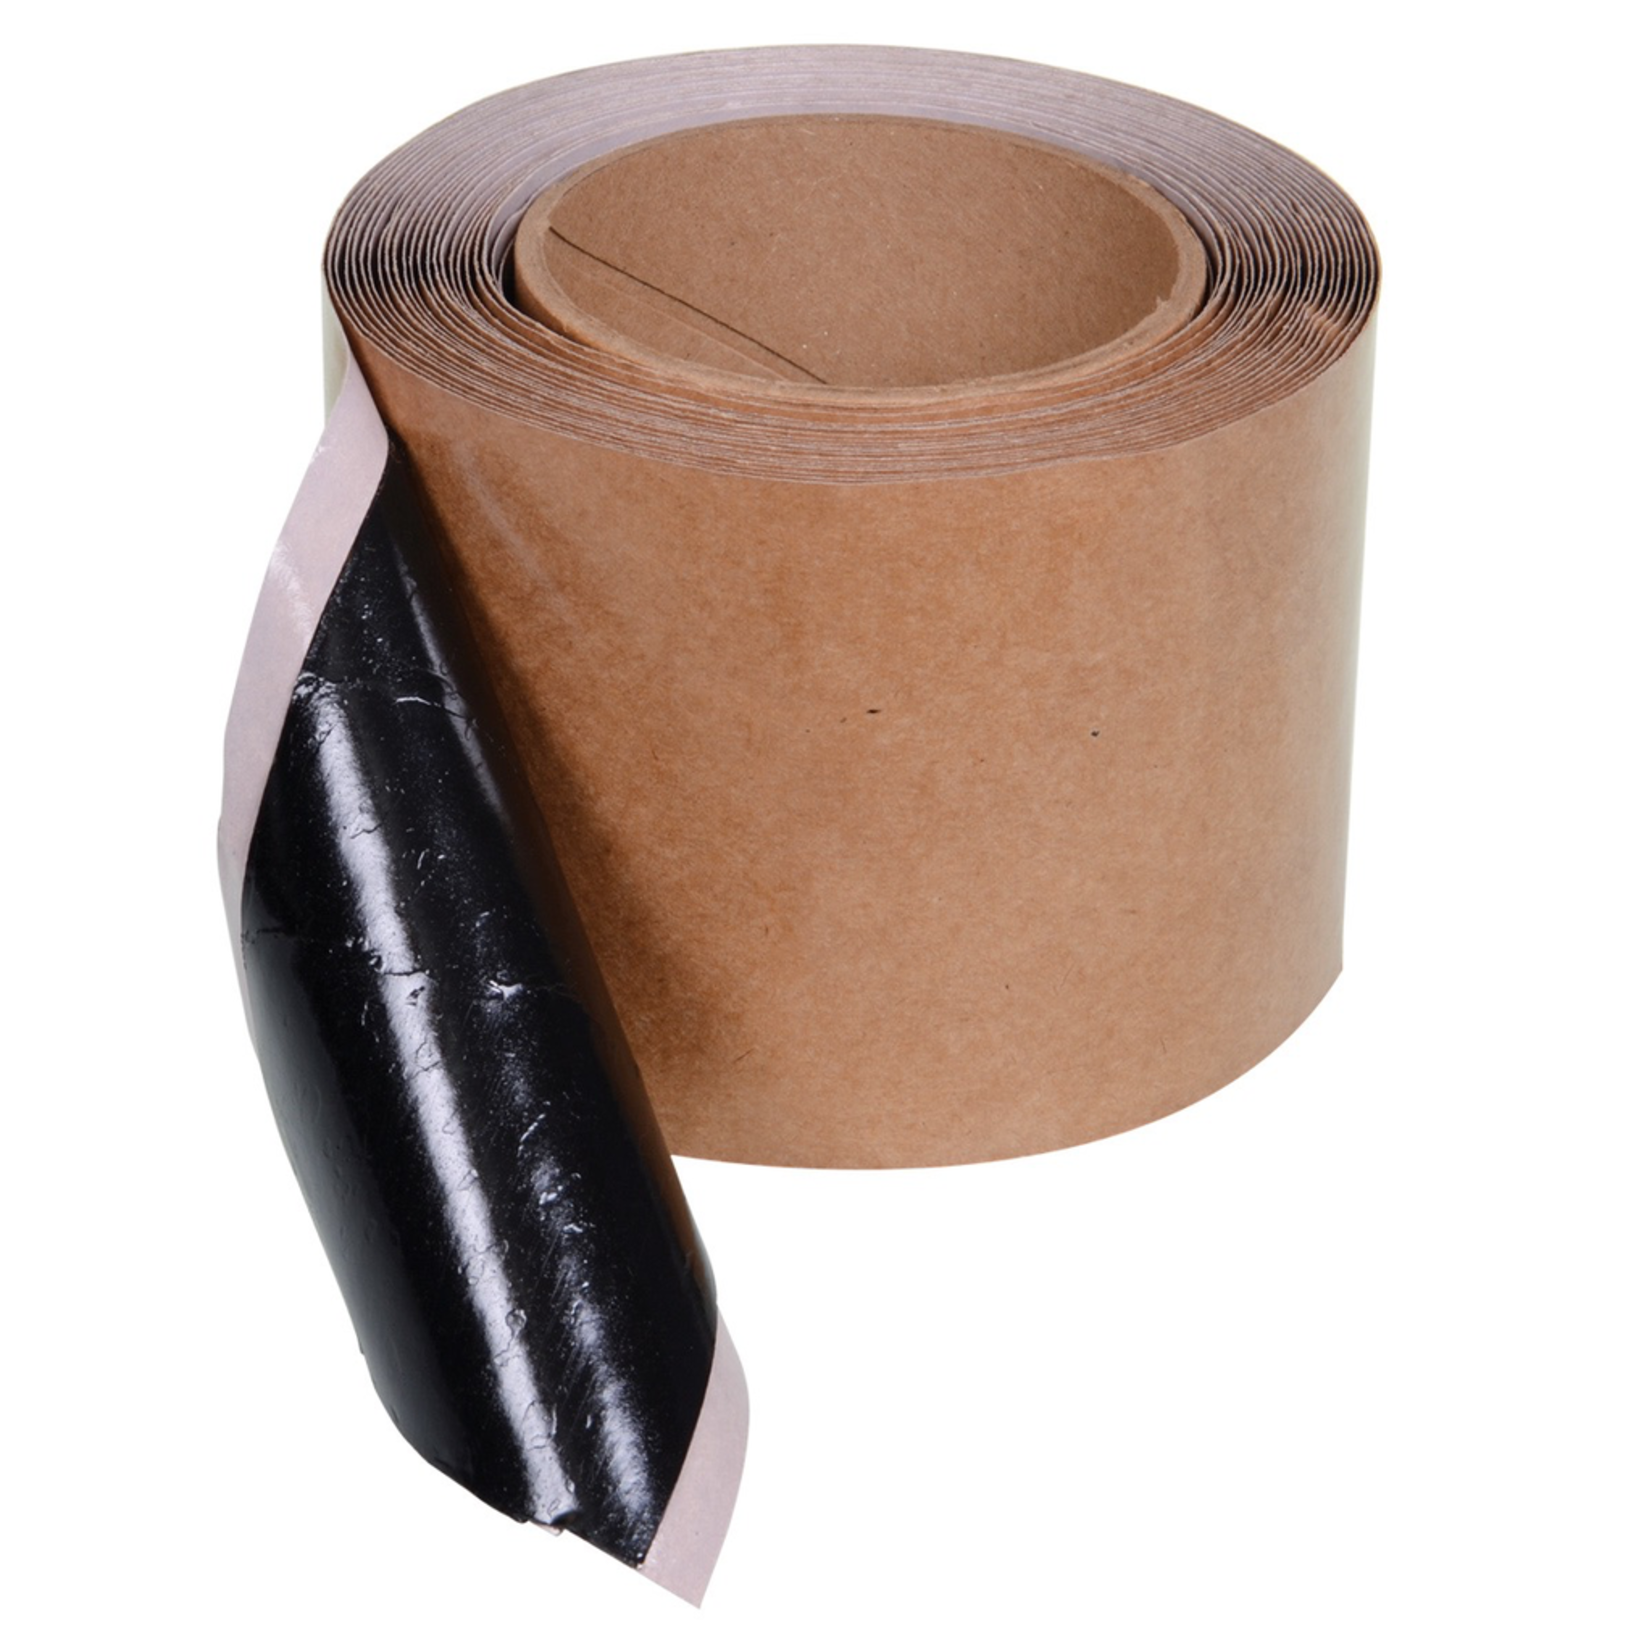 (W) Seam Tape Roll - Double Sided - 3" x 25 ft